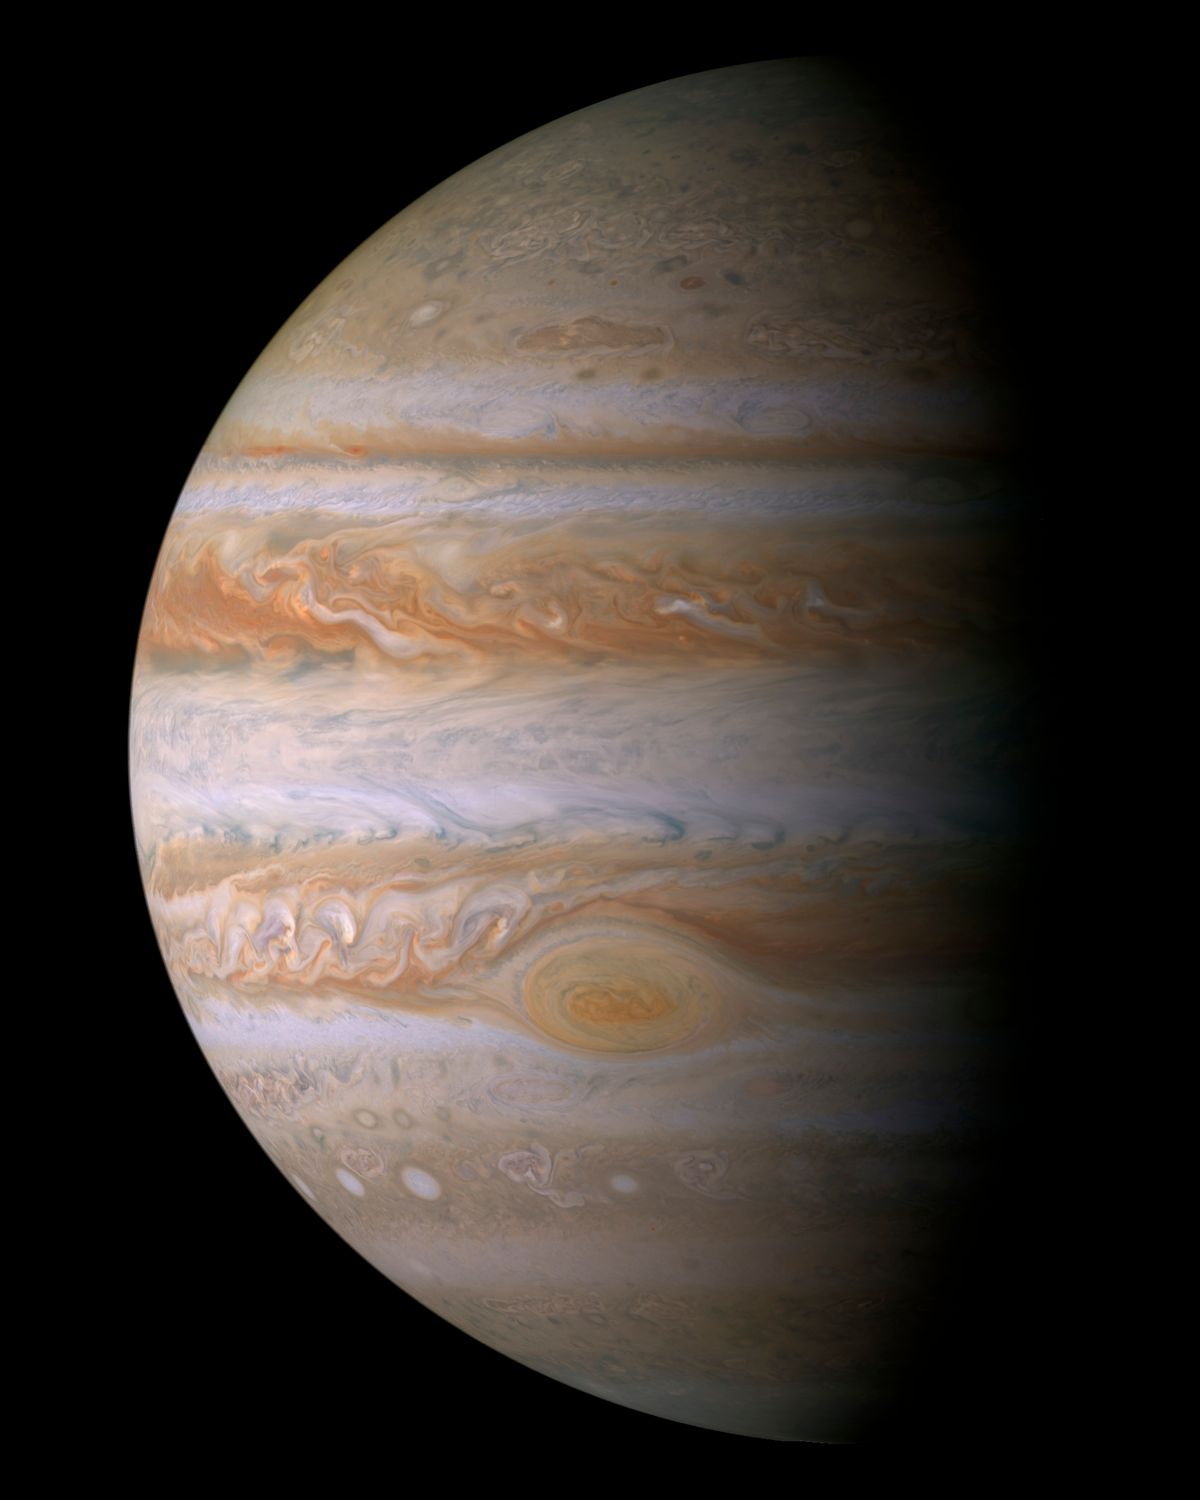 This composite image of photographs made by NASA's Cassini spacecraft on Dec. 29, 2000 shows the planet Jupiter. The photographs taken during the Cassini's closest approach to the gas giant at a distance of approximately 10 million kilometers (6.2 million miles). The Great Red Spot, a fierce storm larger than Earth, has been observed for centuries. But in recent years, it has been mysteriously shrinking. (NASA/JPL/Space Science Institute via AP) (AP)